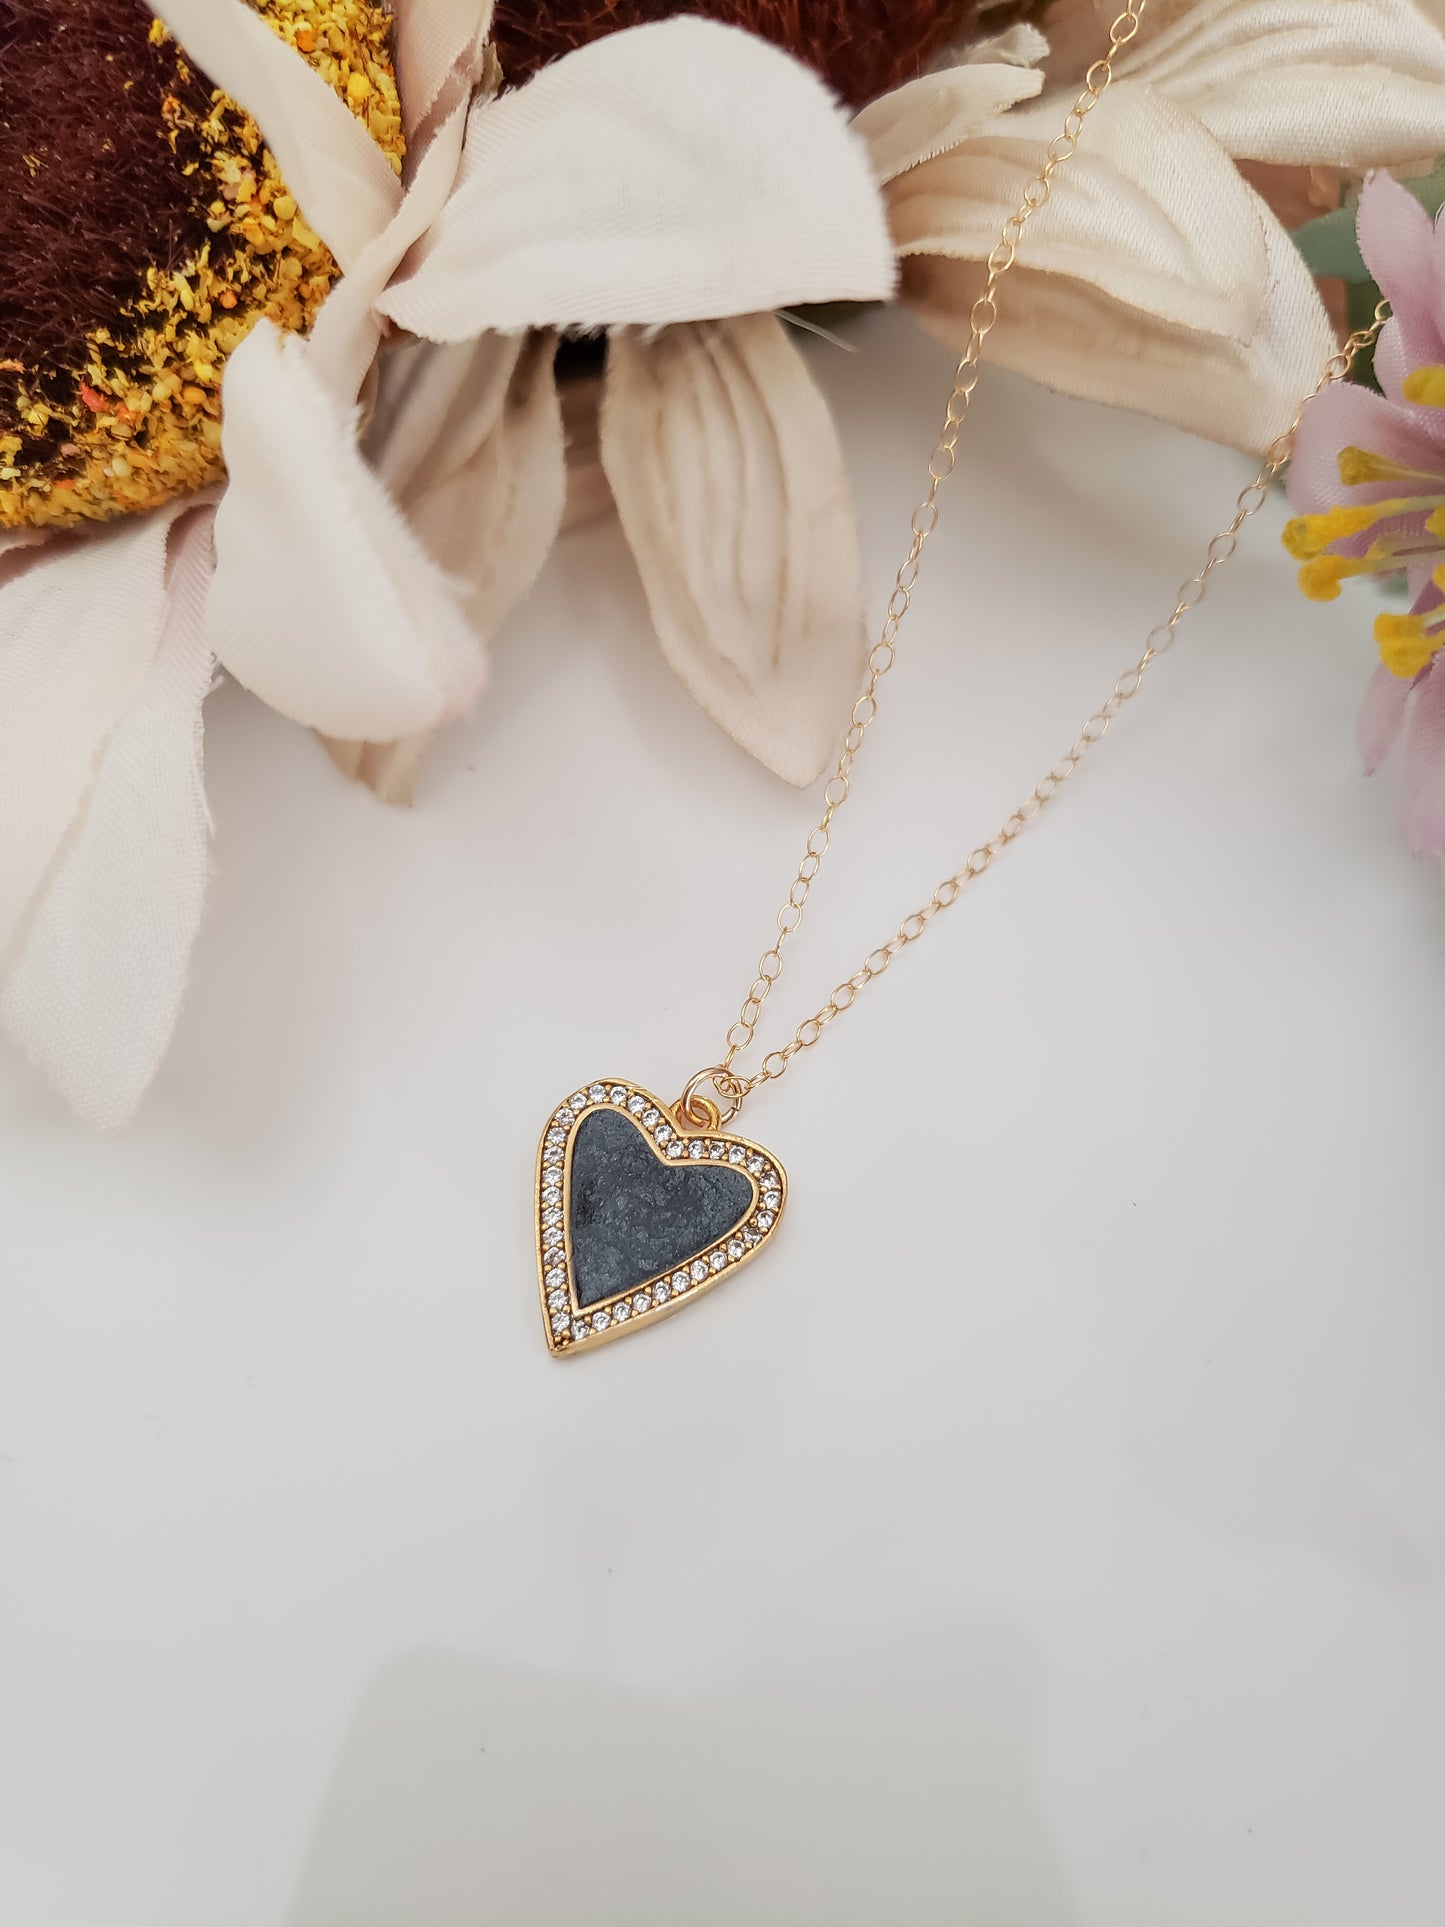 The Gaurded Heart Necklace